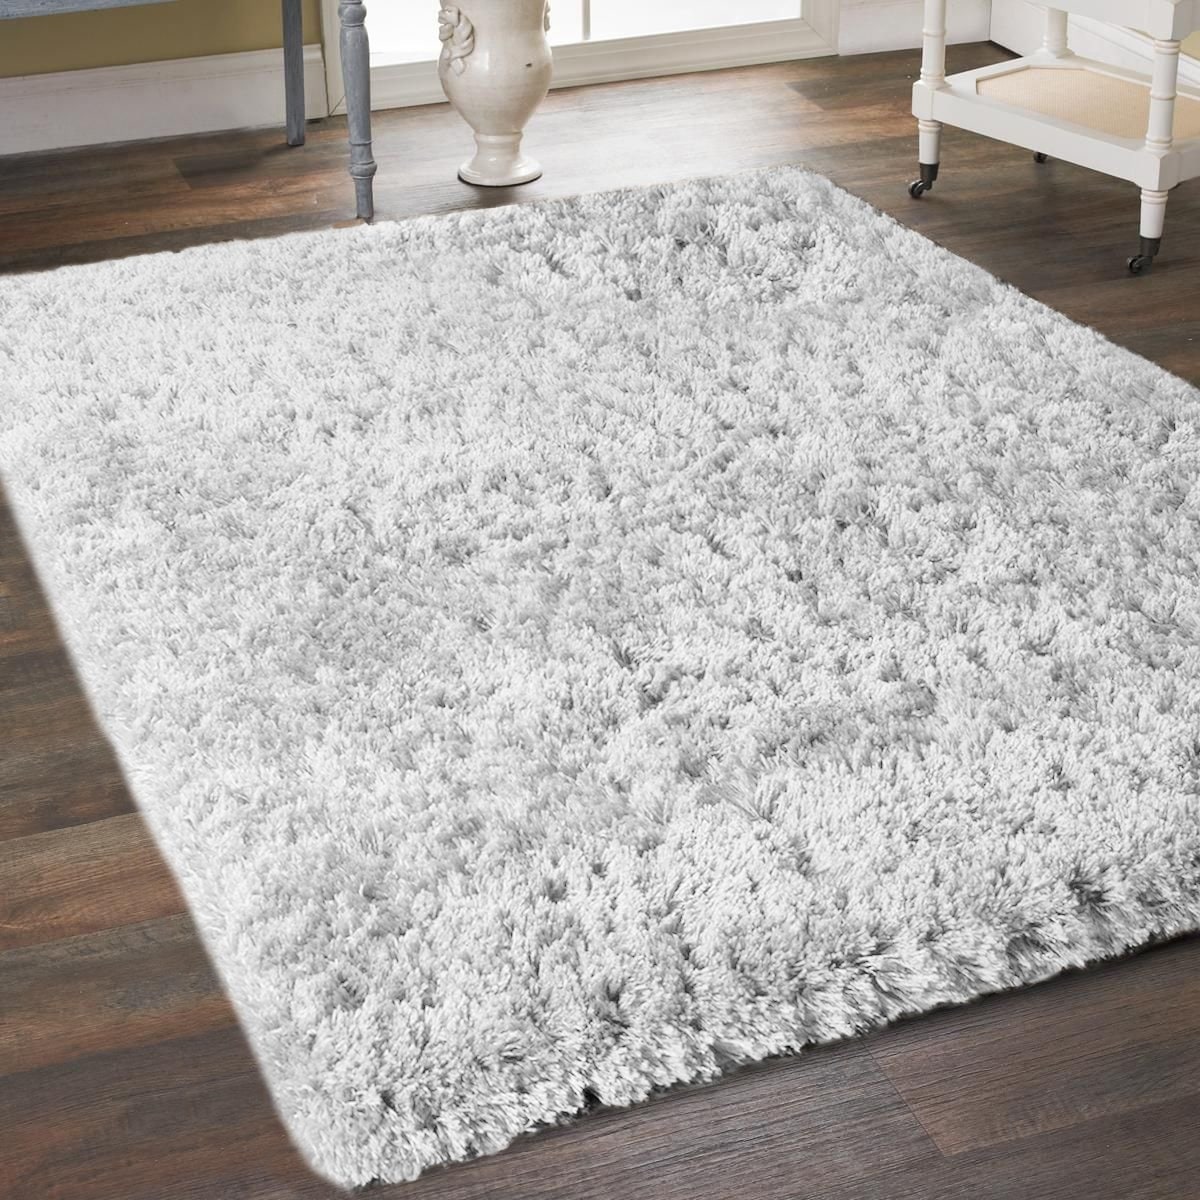 5' x 7', White Home Must Haves Super Soft Thick Plush Pile Cozy Modern Shaggy Shag Microfiber Area Rug 